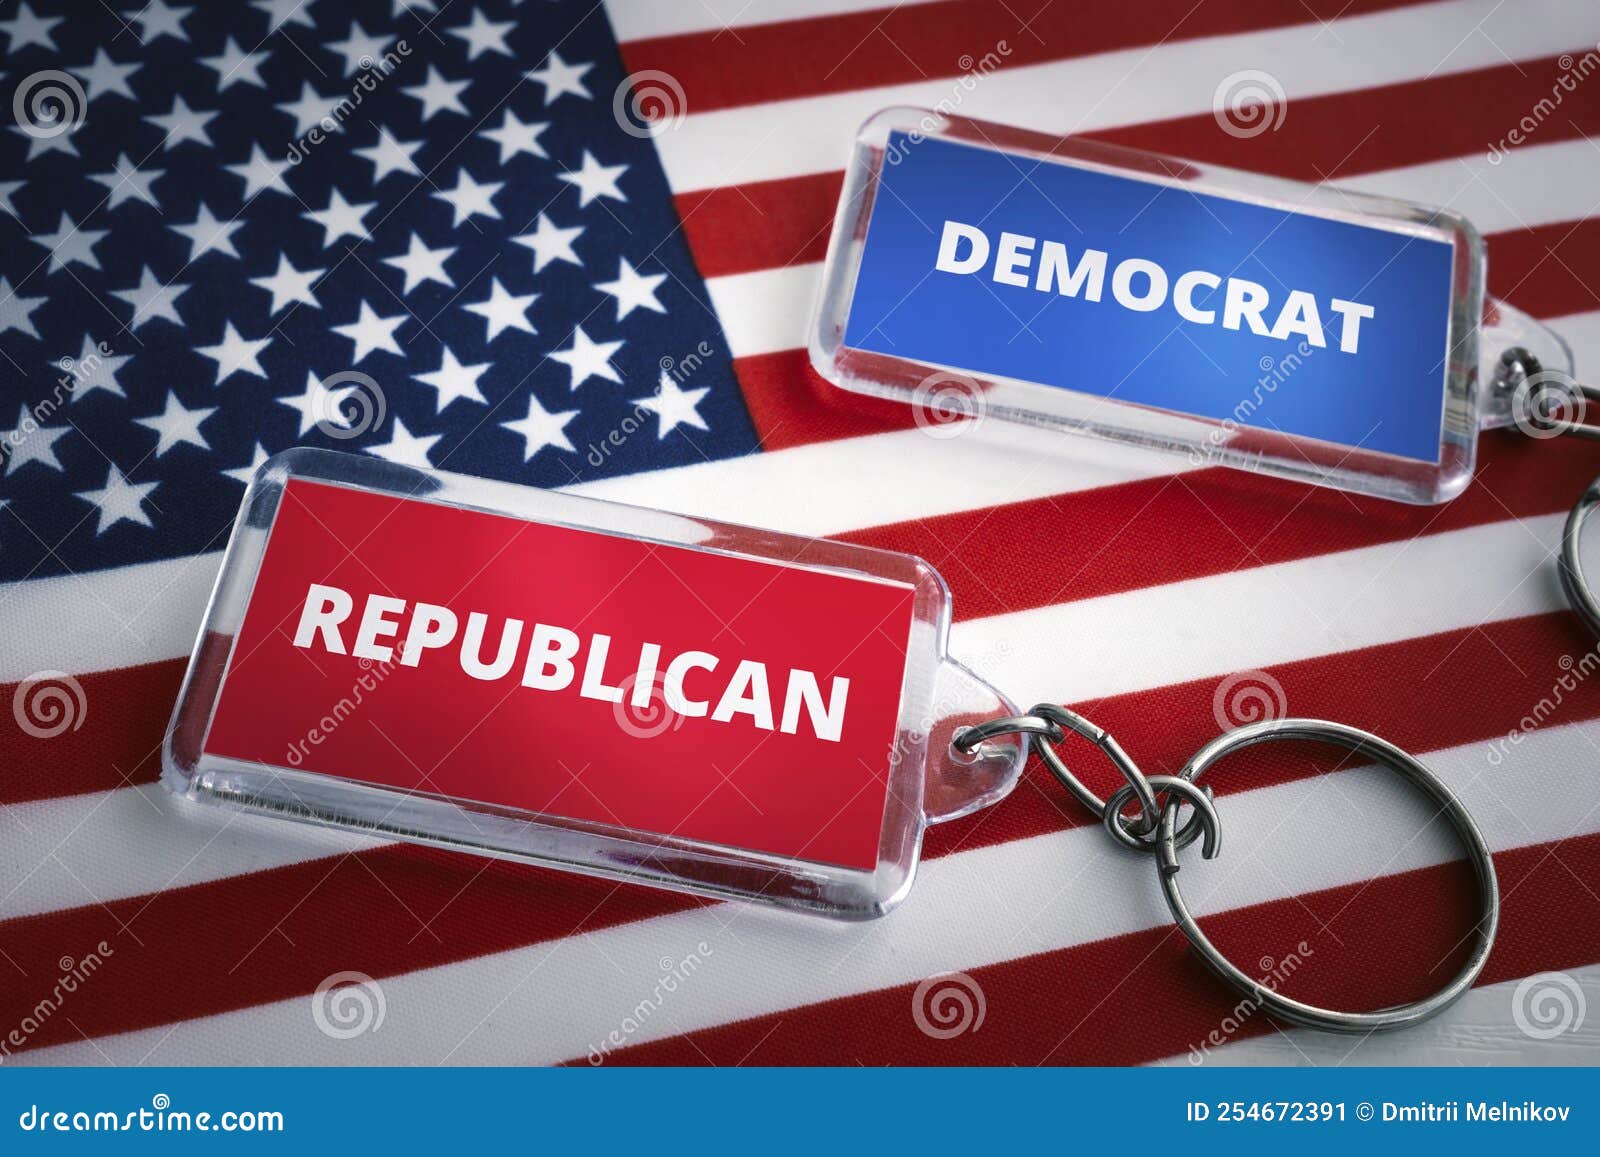 keychain of the republican party and the democratic party on the background of the us flag. opposition of republicans and